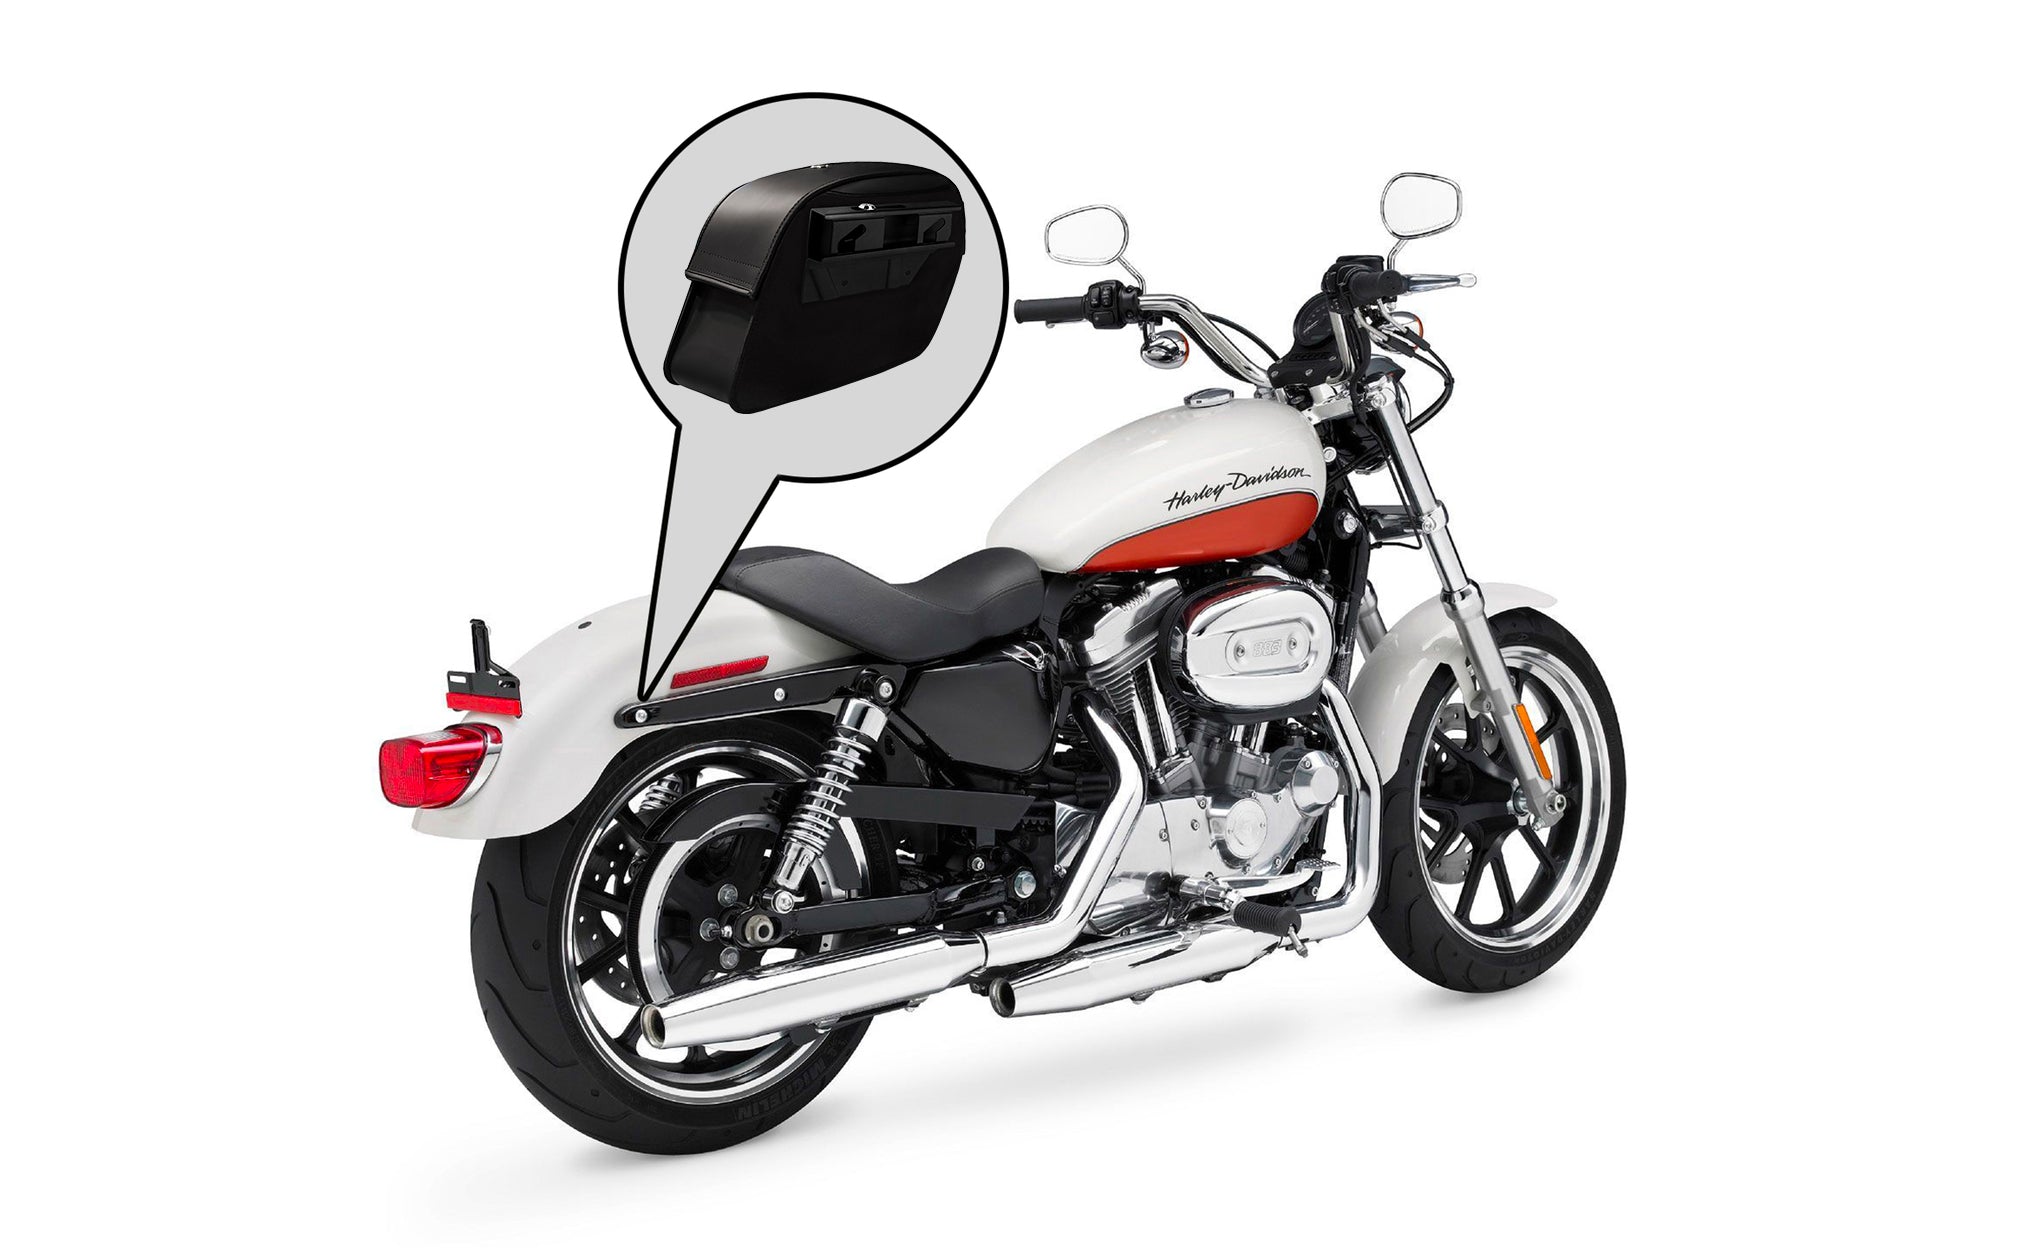 Viking Saddlebags Quick Disconnect System For Honda Shadow Bag on Bike View @expand